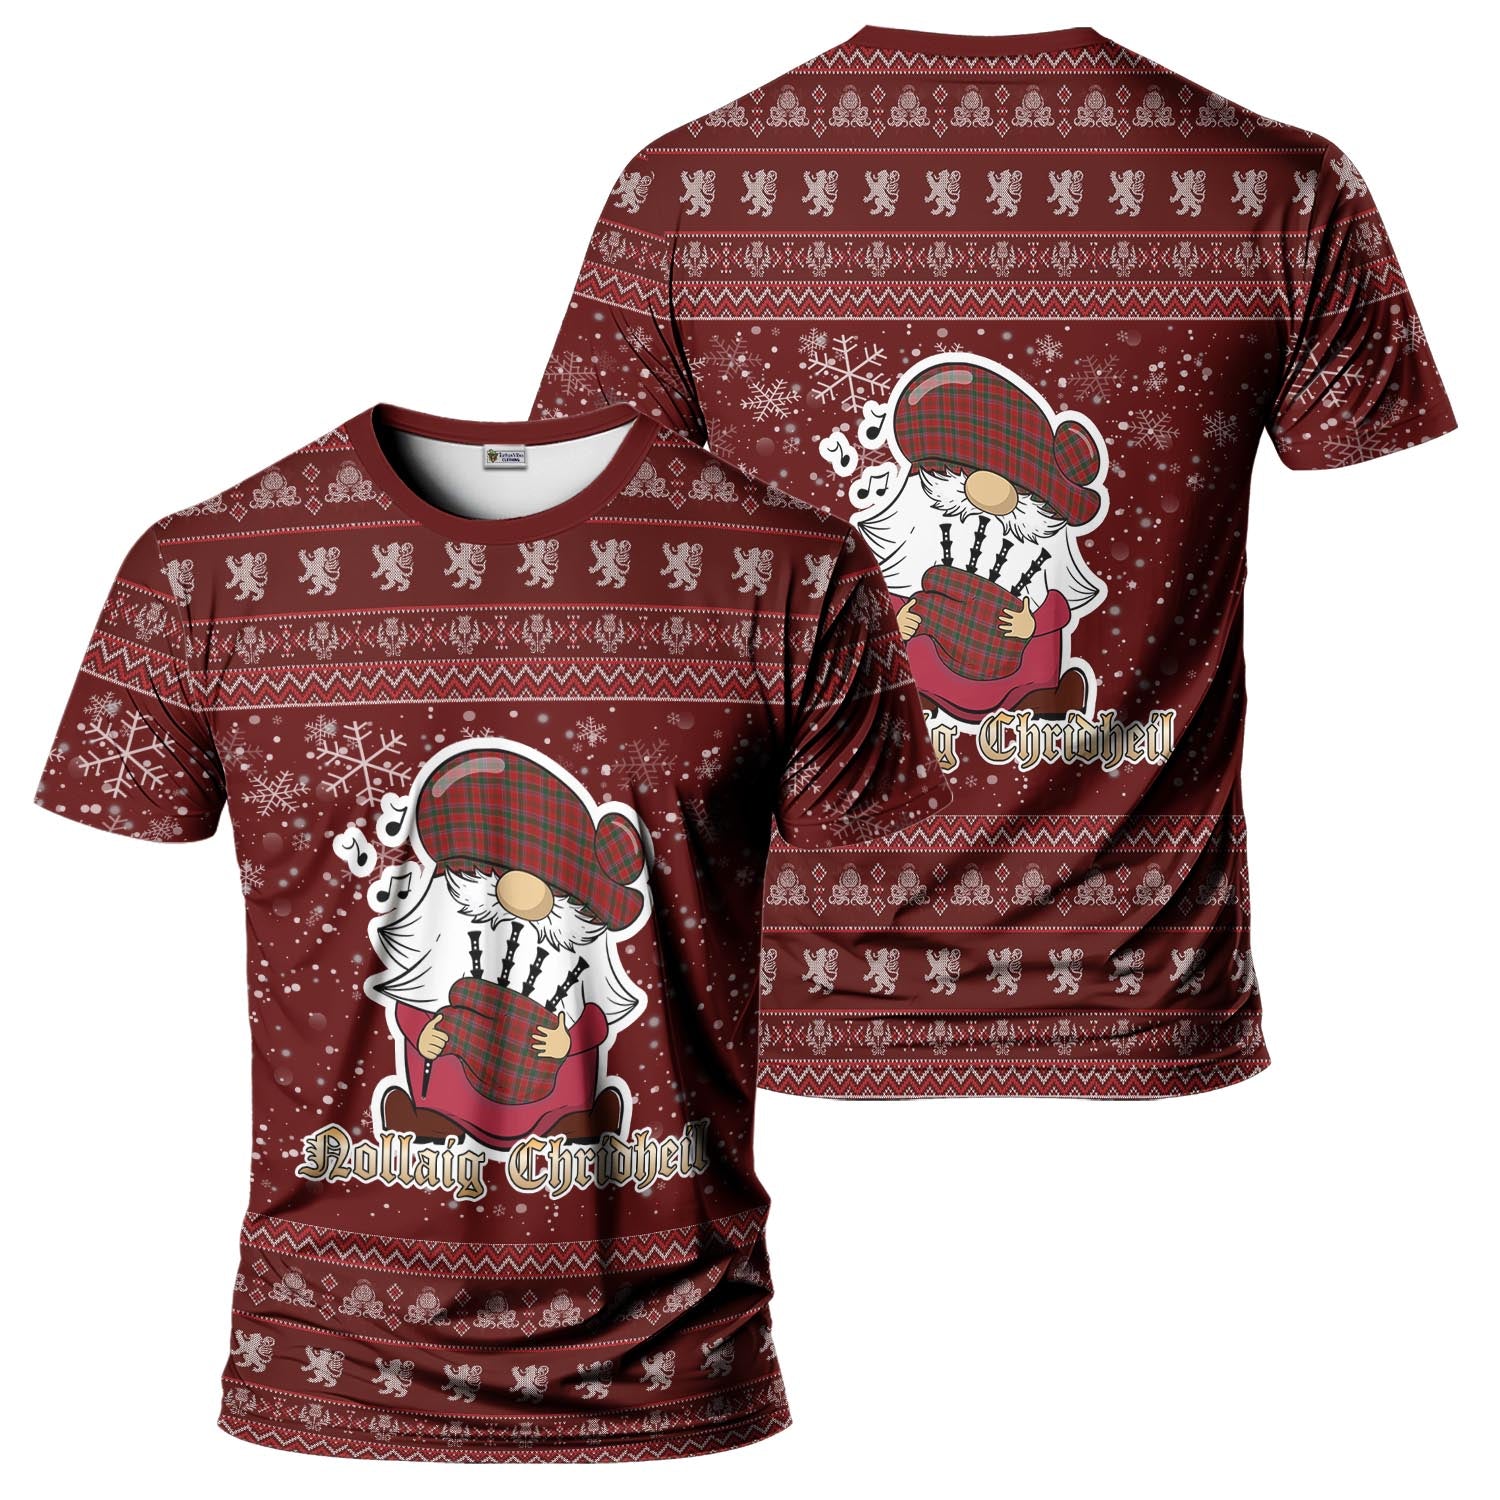 Dalzell (Dalziel) Clan Christmas Family T-Shirt with Funny Gnome Playing Bagpipes - Tartanvibesclothing